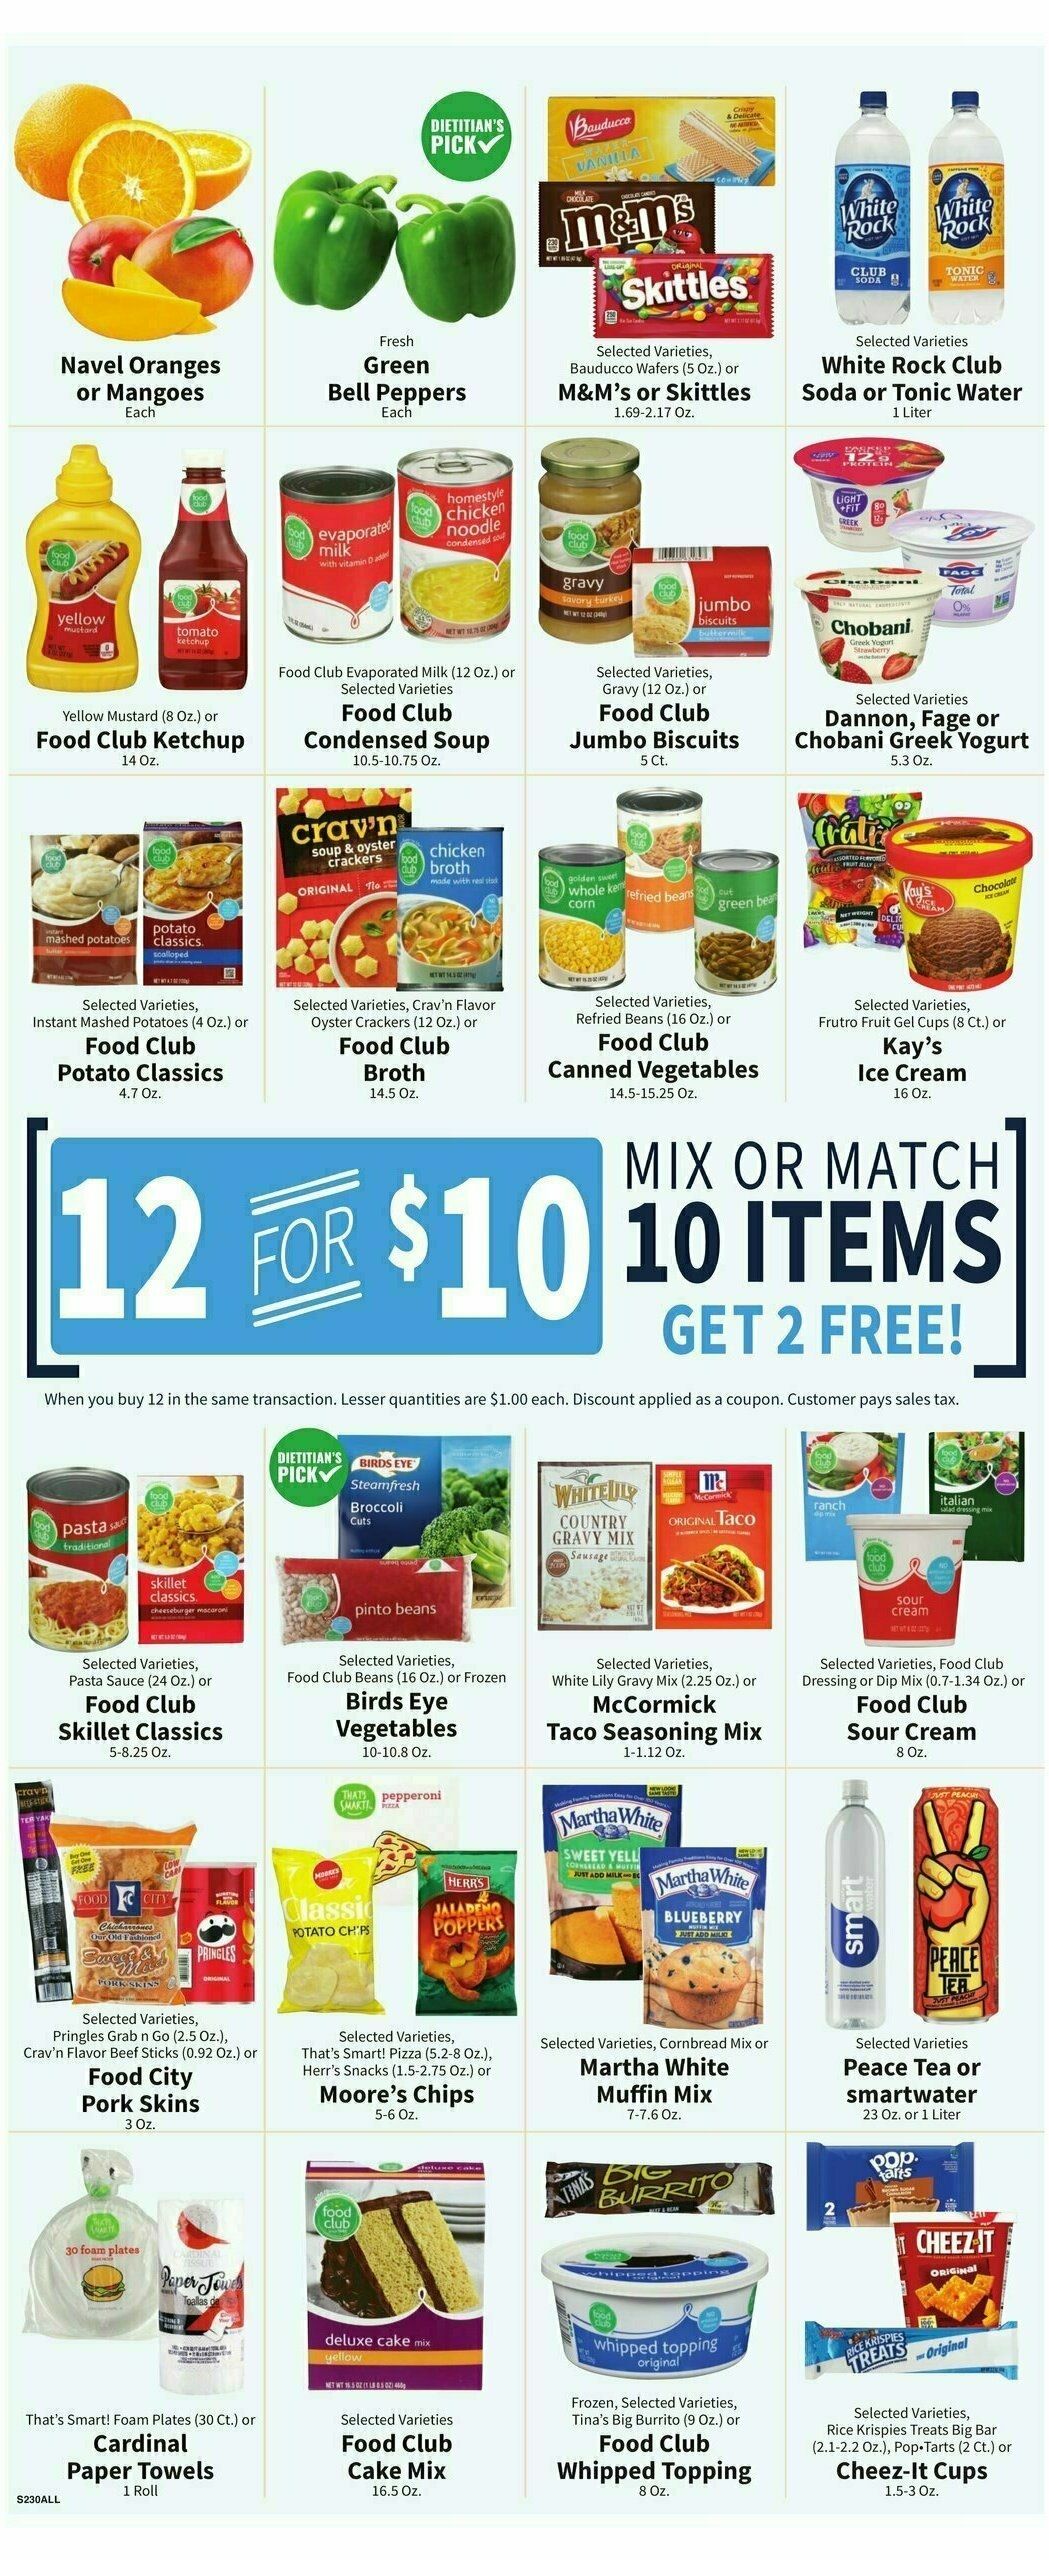 Food City Weekly Ad from October 25